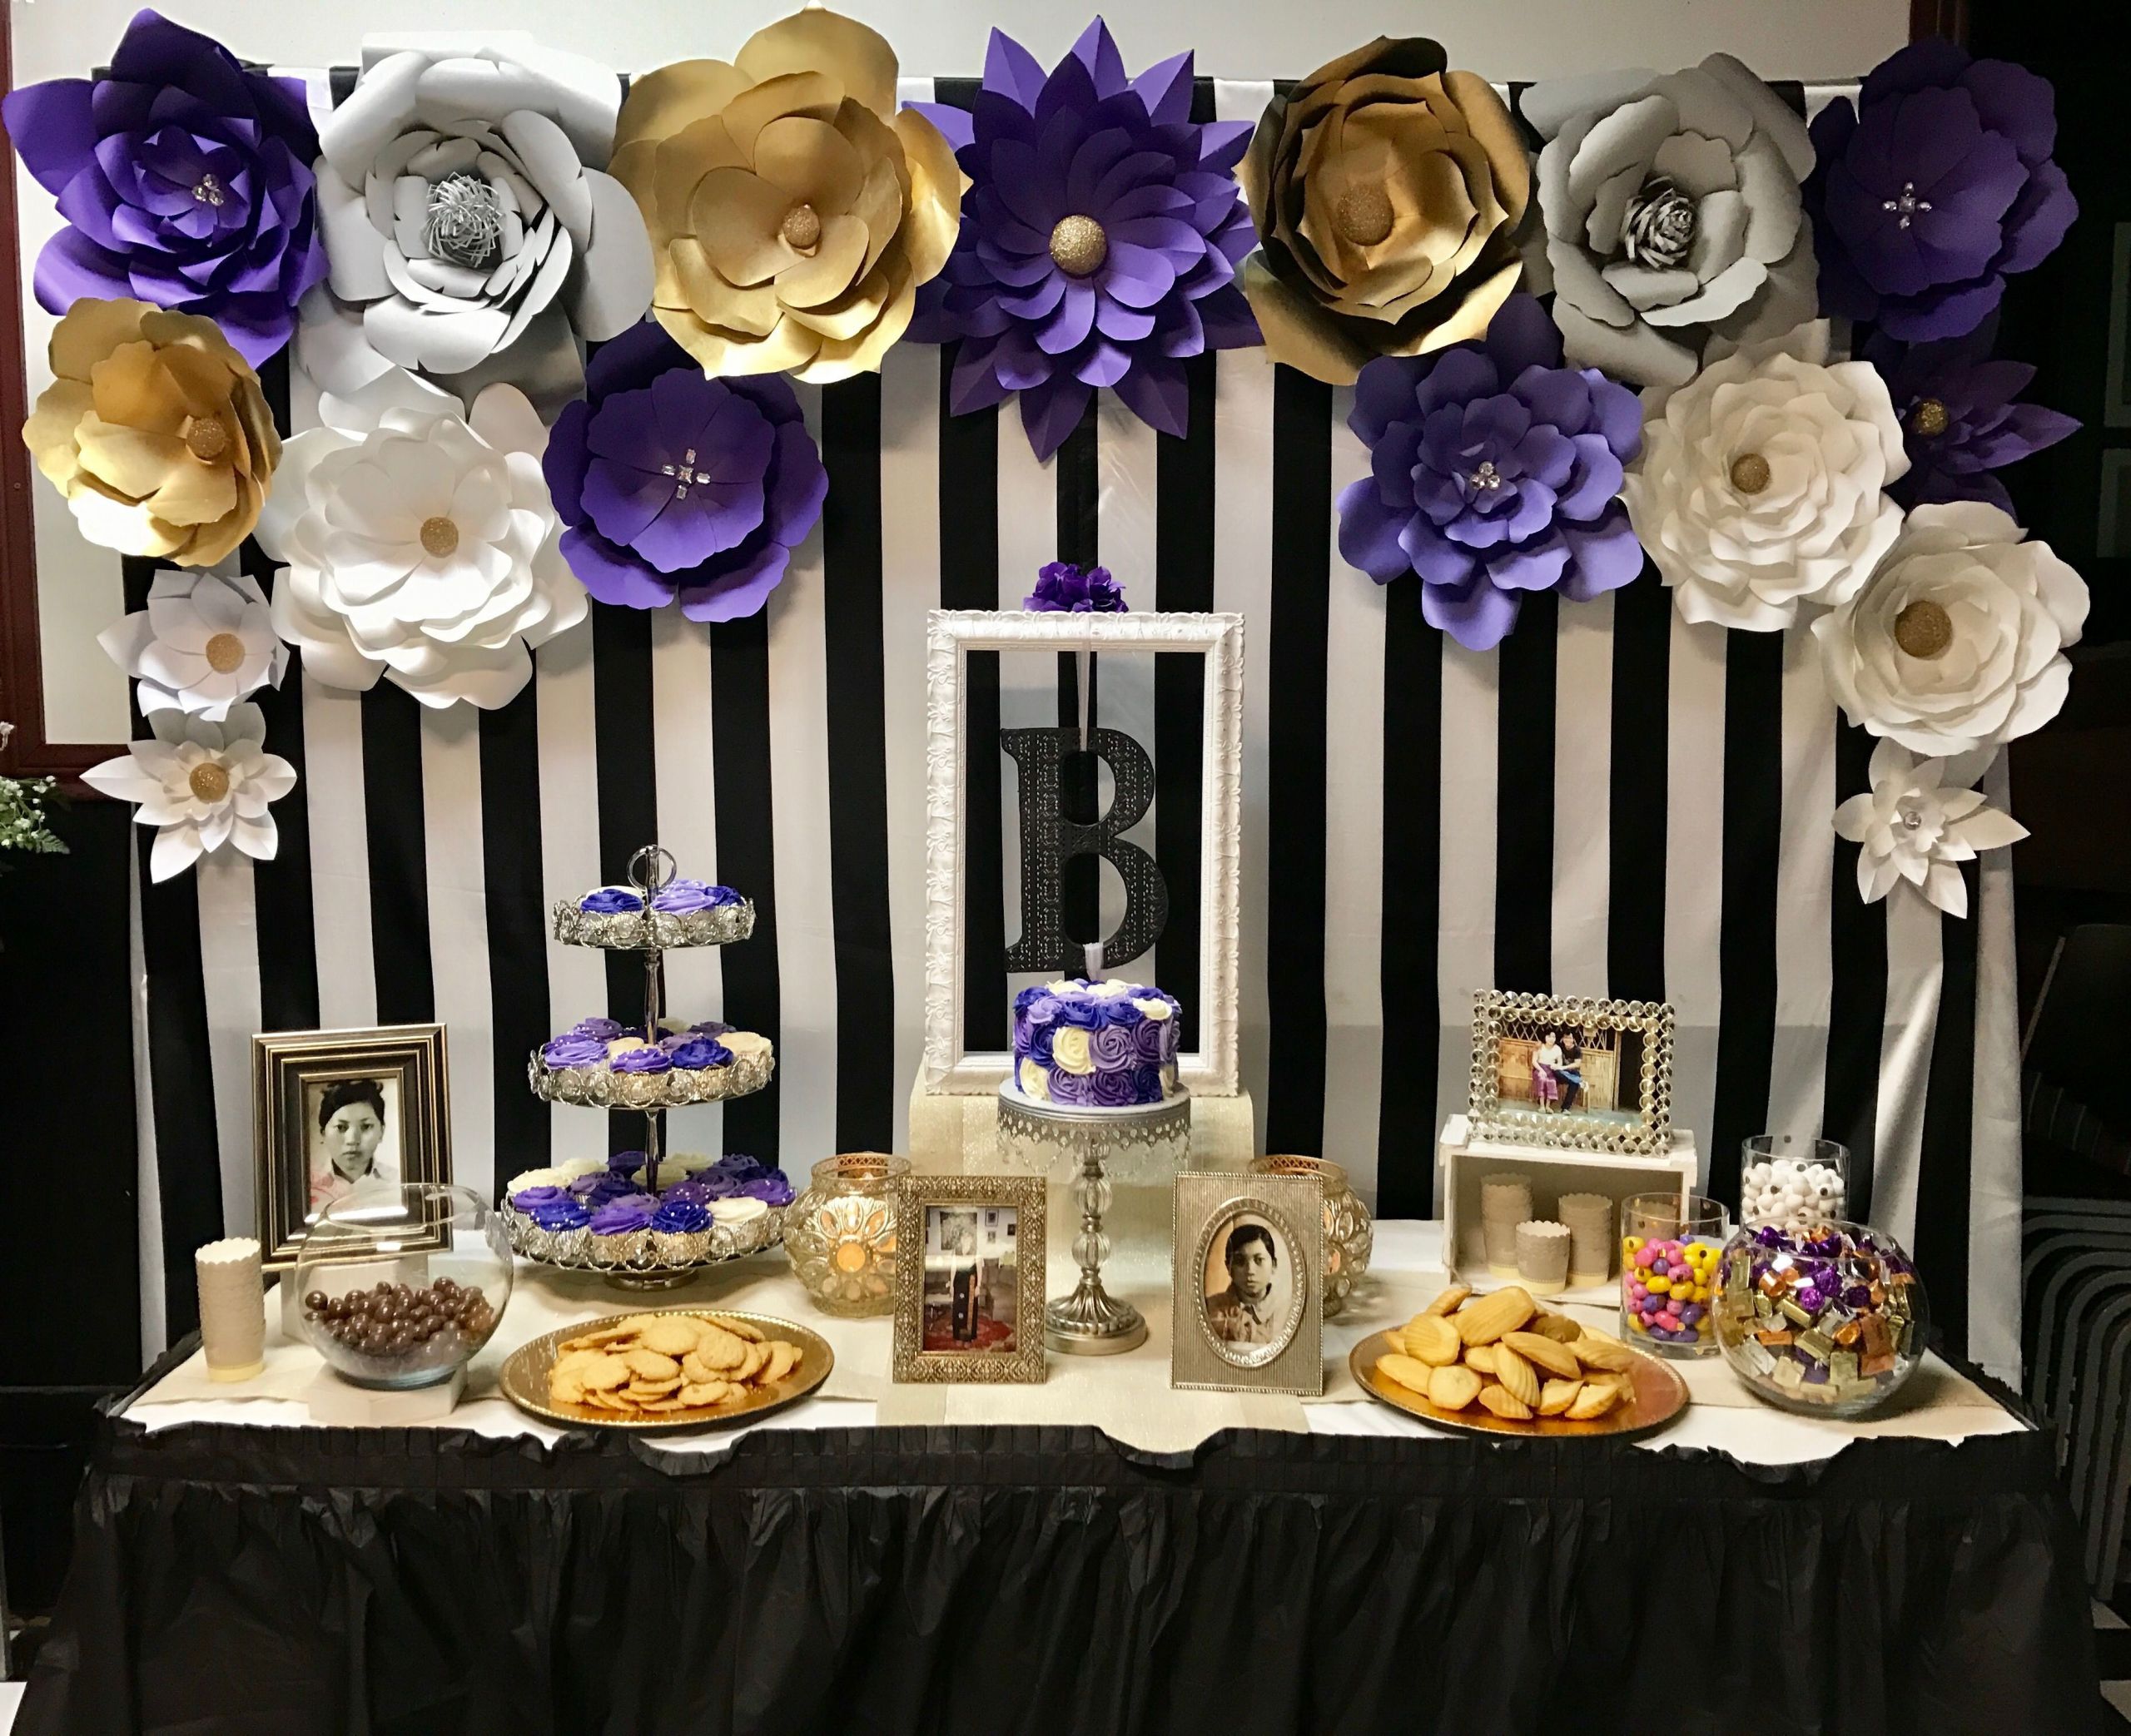 60th Birthday Table Decorations
 Dessert table with paper flowers backdrop for purple